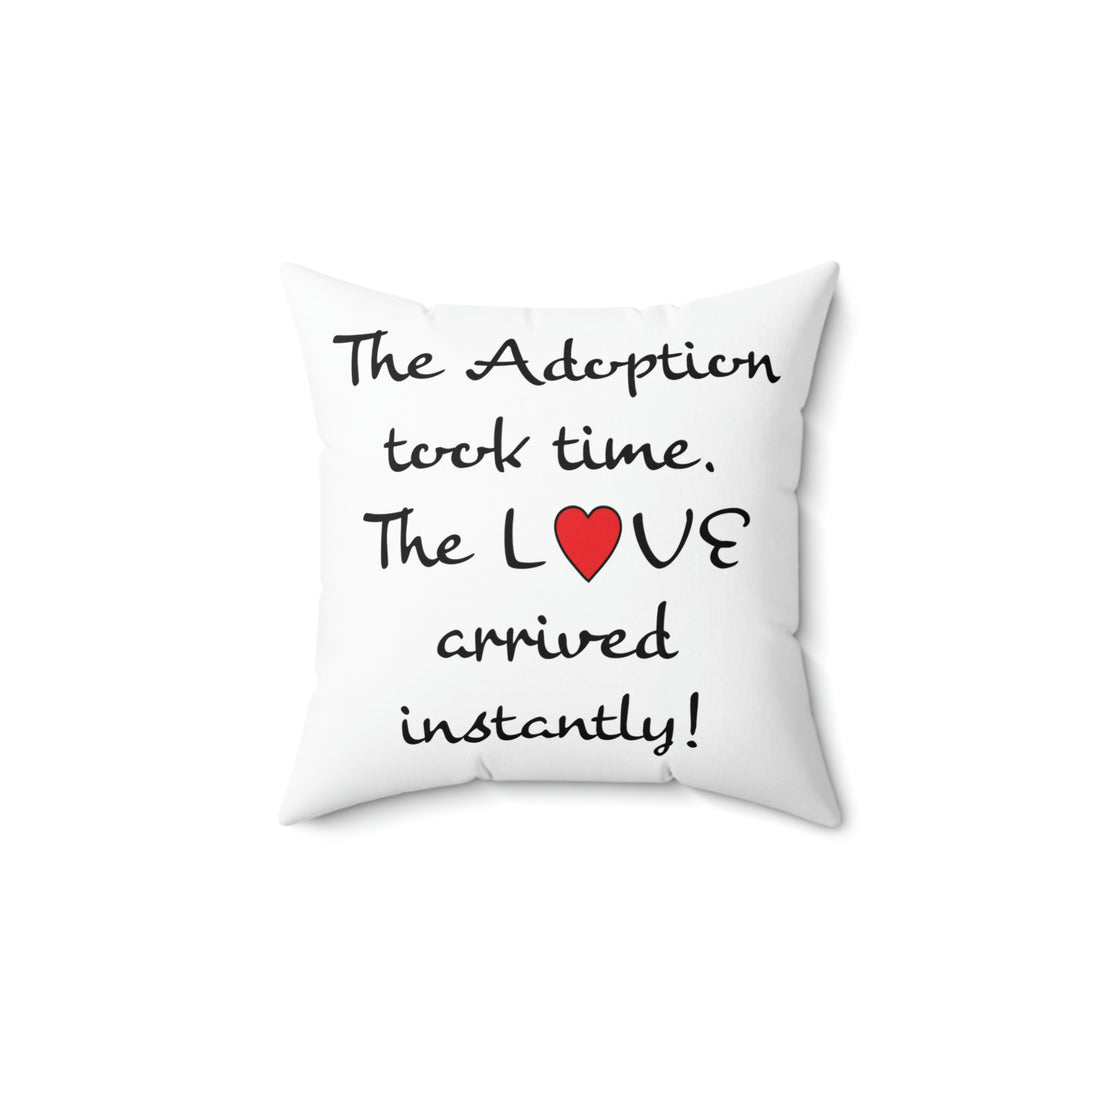 The Adoption took time but the Love came Instantly - White Pillow